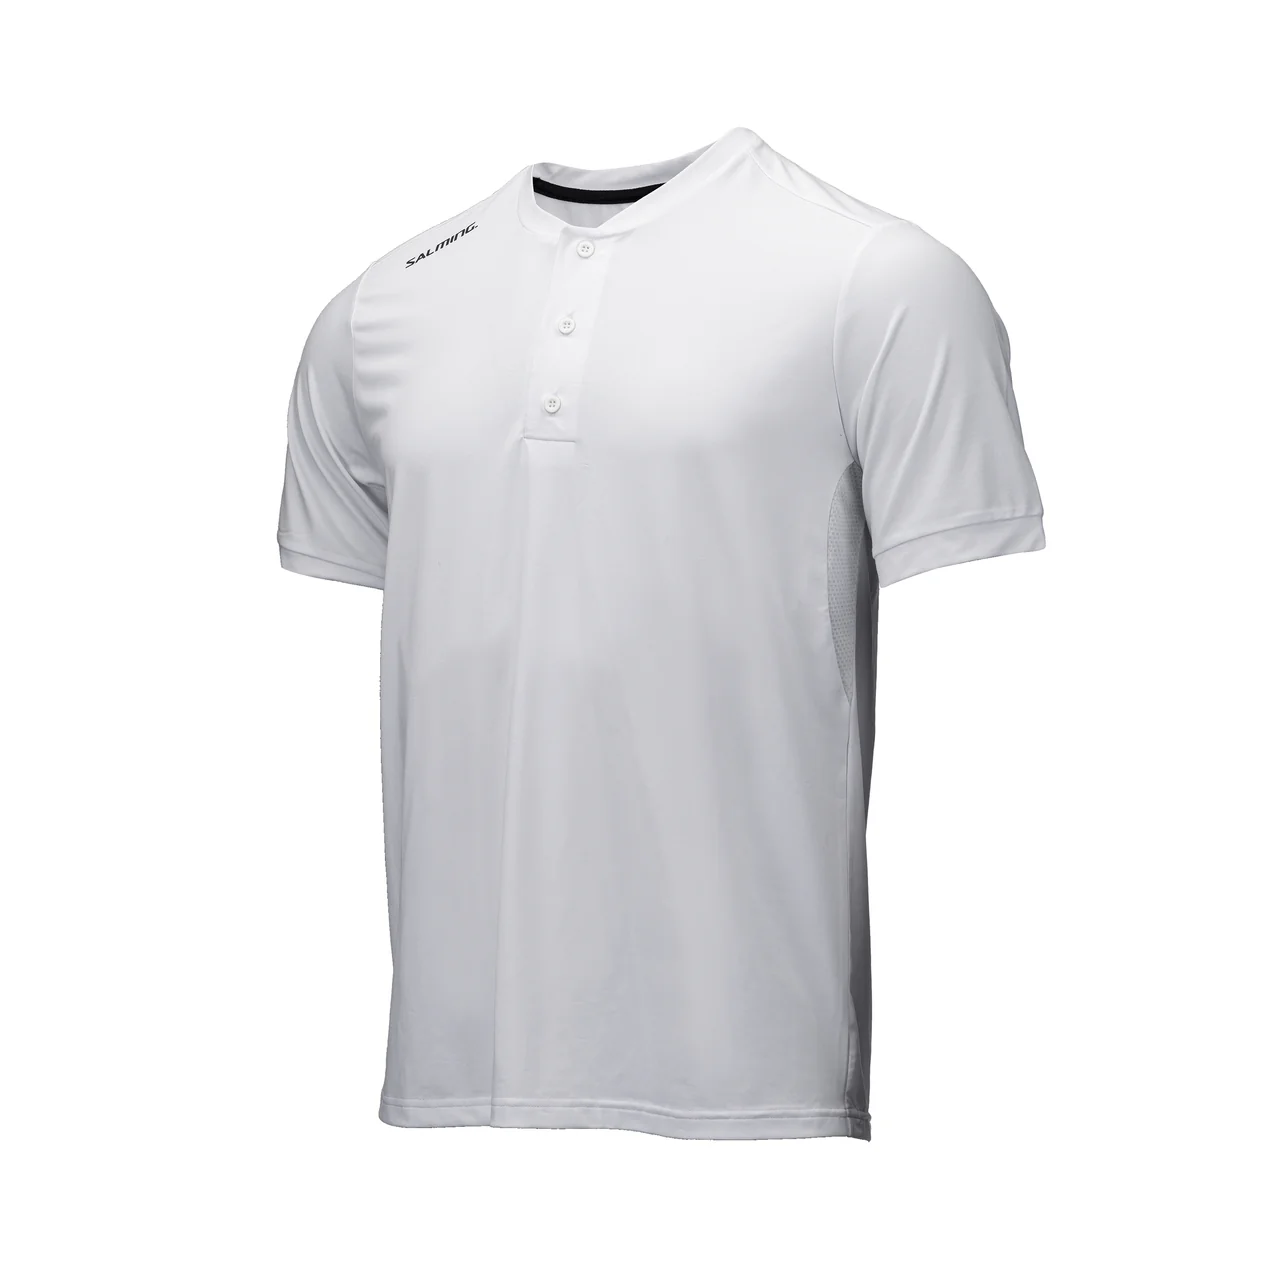 Salming Classic Button Jersey White